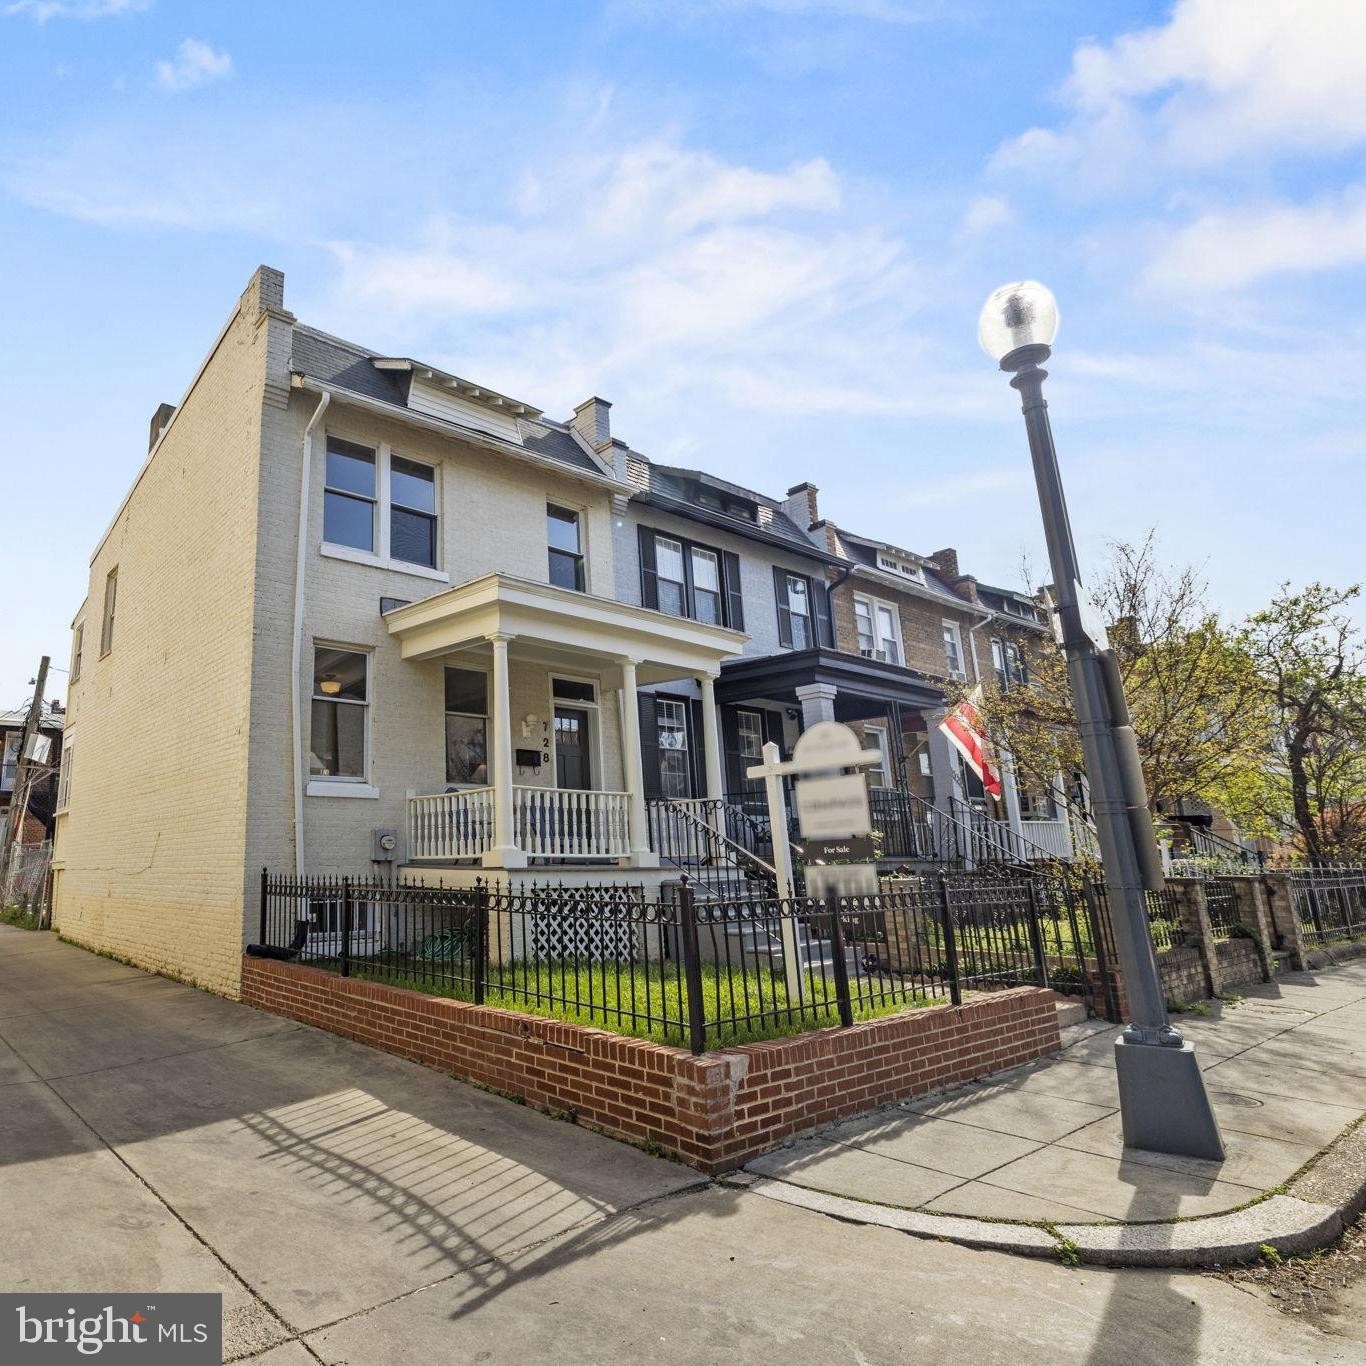 27. 728 Newton Place NW